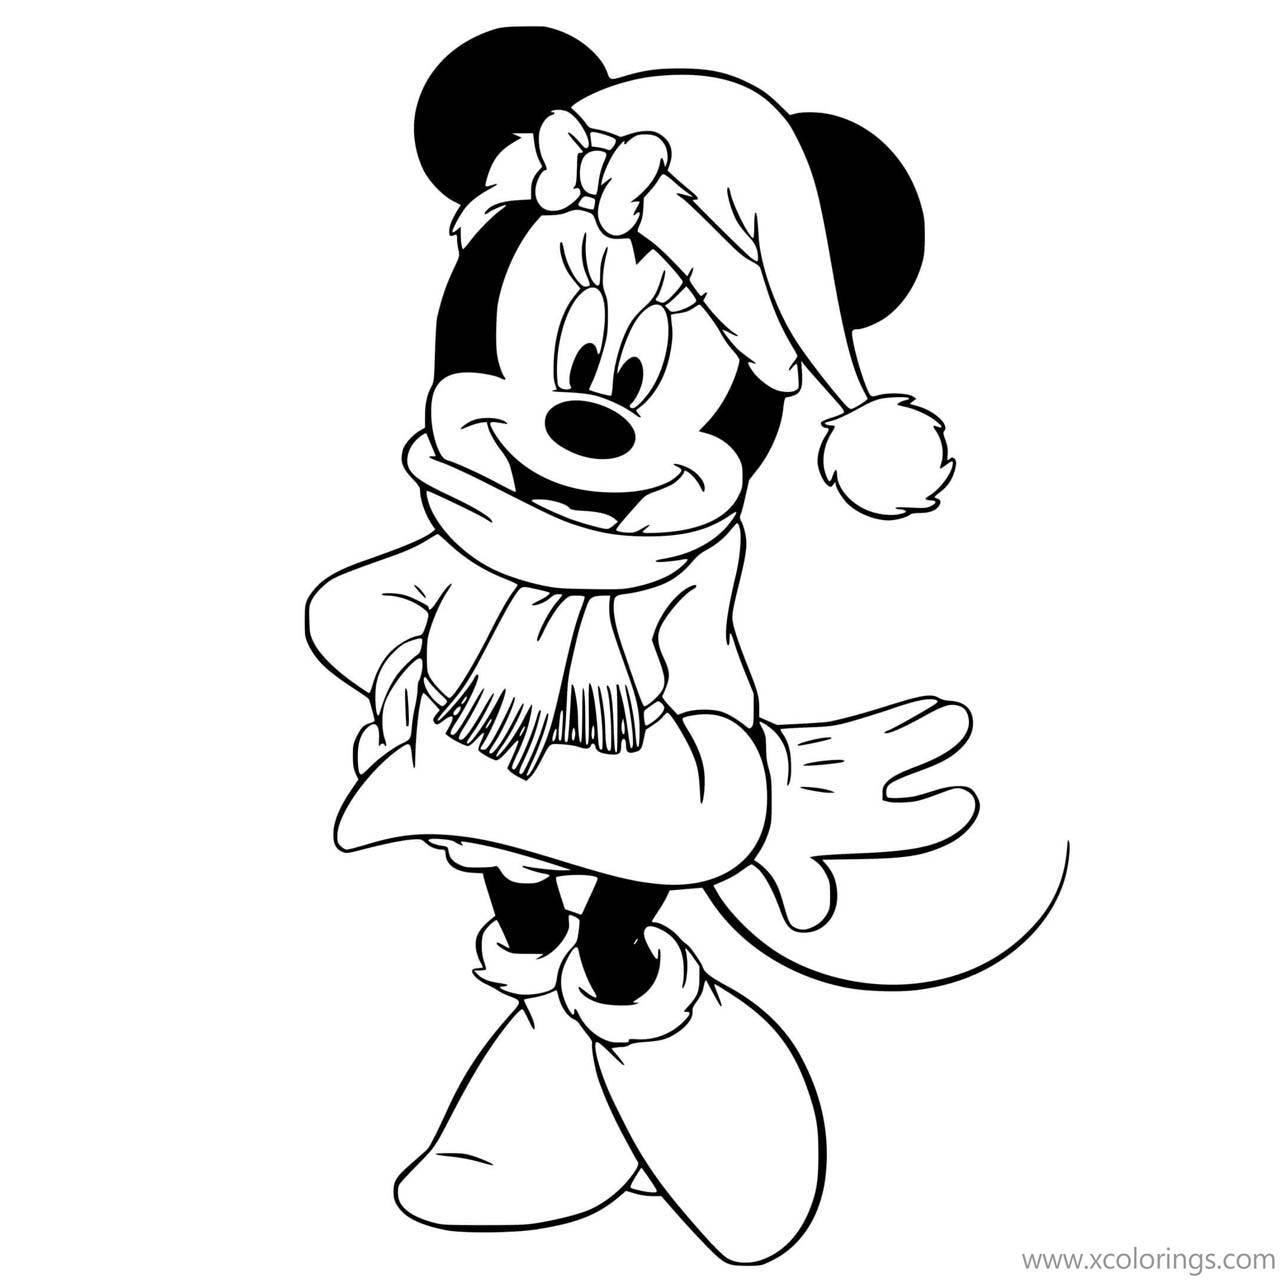 Free Minnie Mouse Christmas Coloring Pages with Santa Hat printable